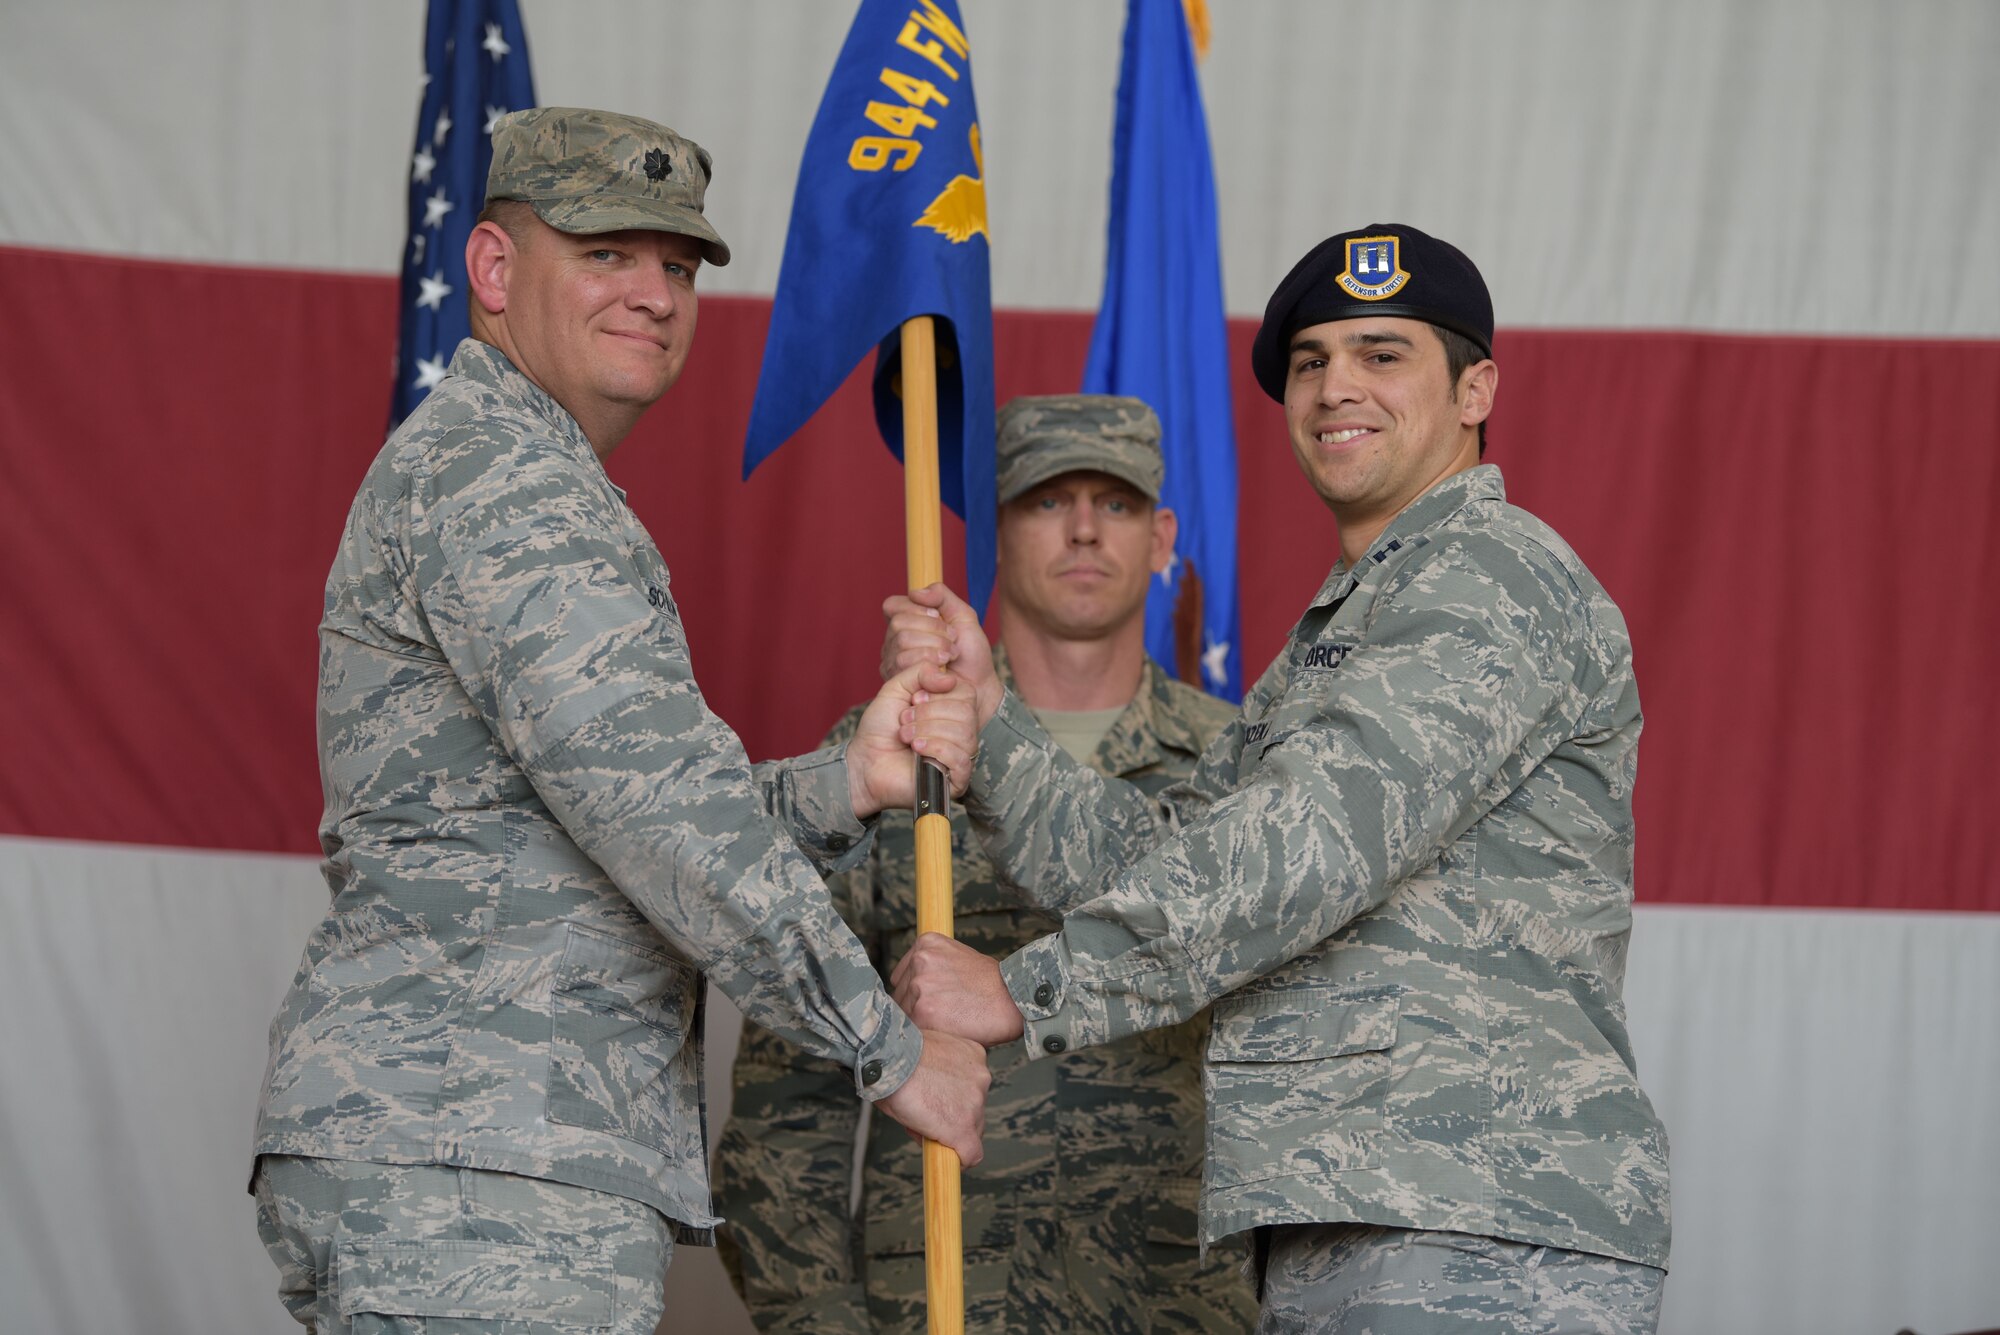 Lt. Col. Kip Schlum, 944th Mission Support Group deputy commander, passes the guidon to Capt. Jonathan Warzeka, 944th Security Forces Squadron incoming commander.